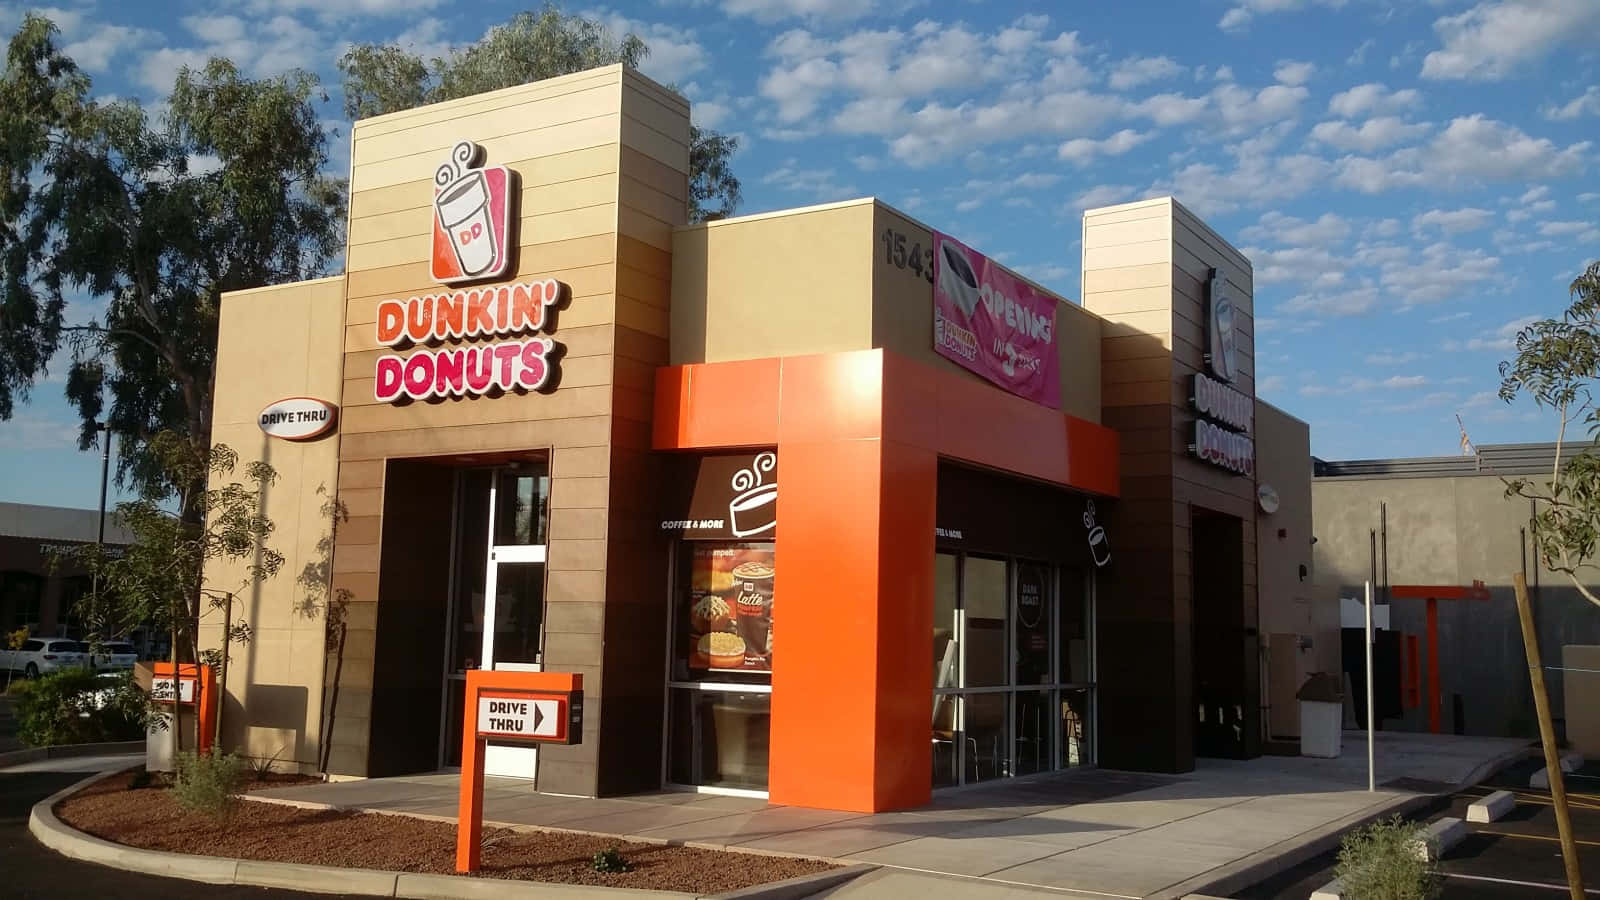 A Fresh, Morning Delight With Dunkin Donuts